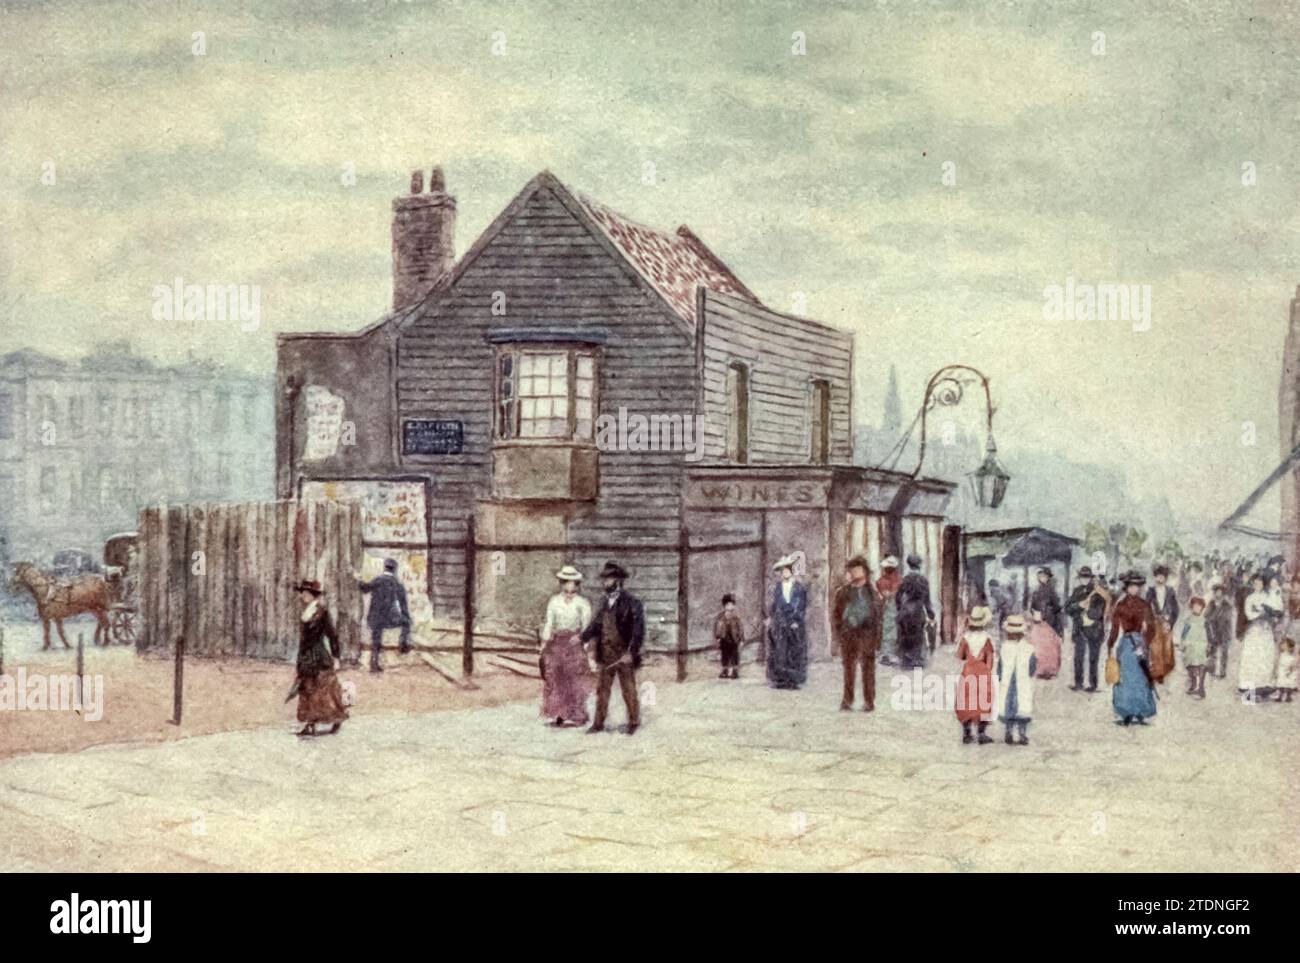 Vine Tavern, Mile End, looking West, 1903 from the book ' London vanished and vanishing ' by Norman, Philip, 1842-1931 Published in 1905 in London by Adam & Charles Black Philip E Norman FSA (9 July 1842 – 17 May 1931) was a British artist, author and antiquary. Stock Photo